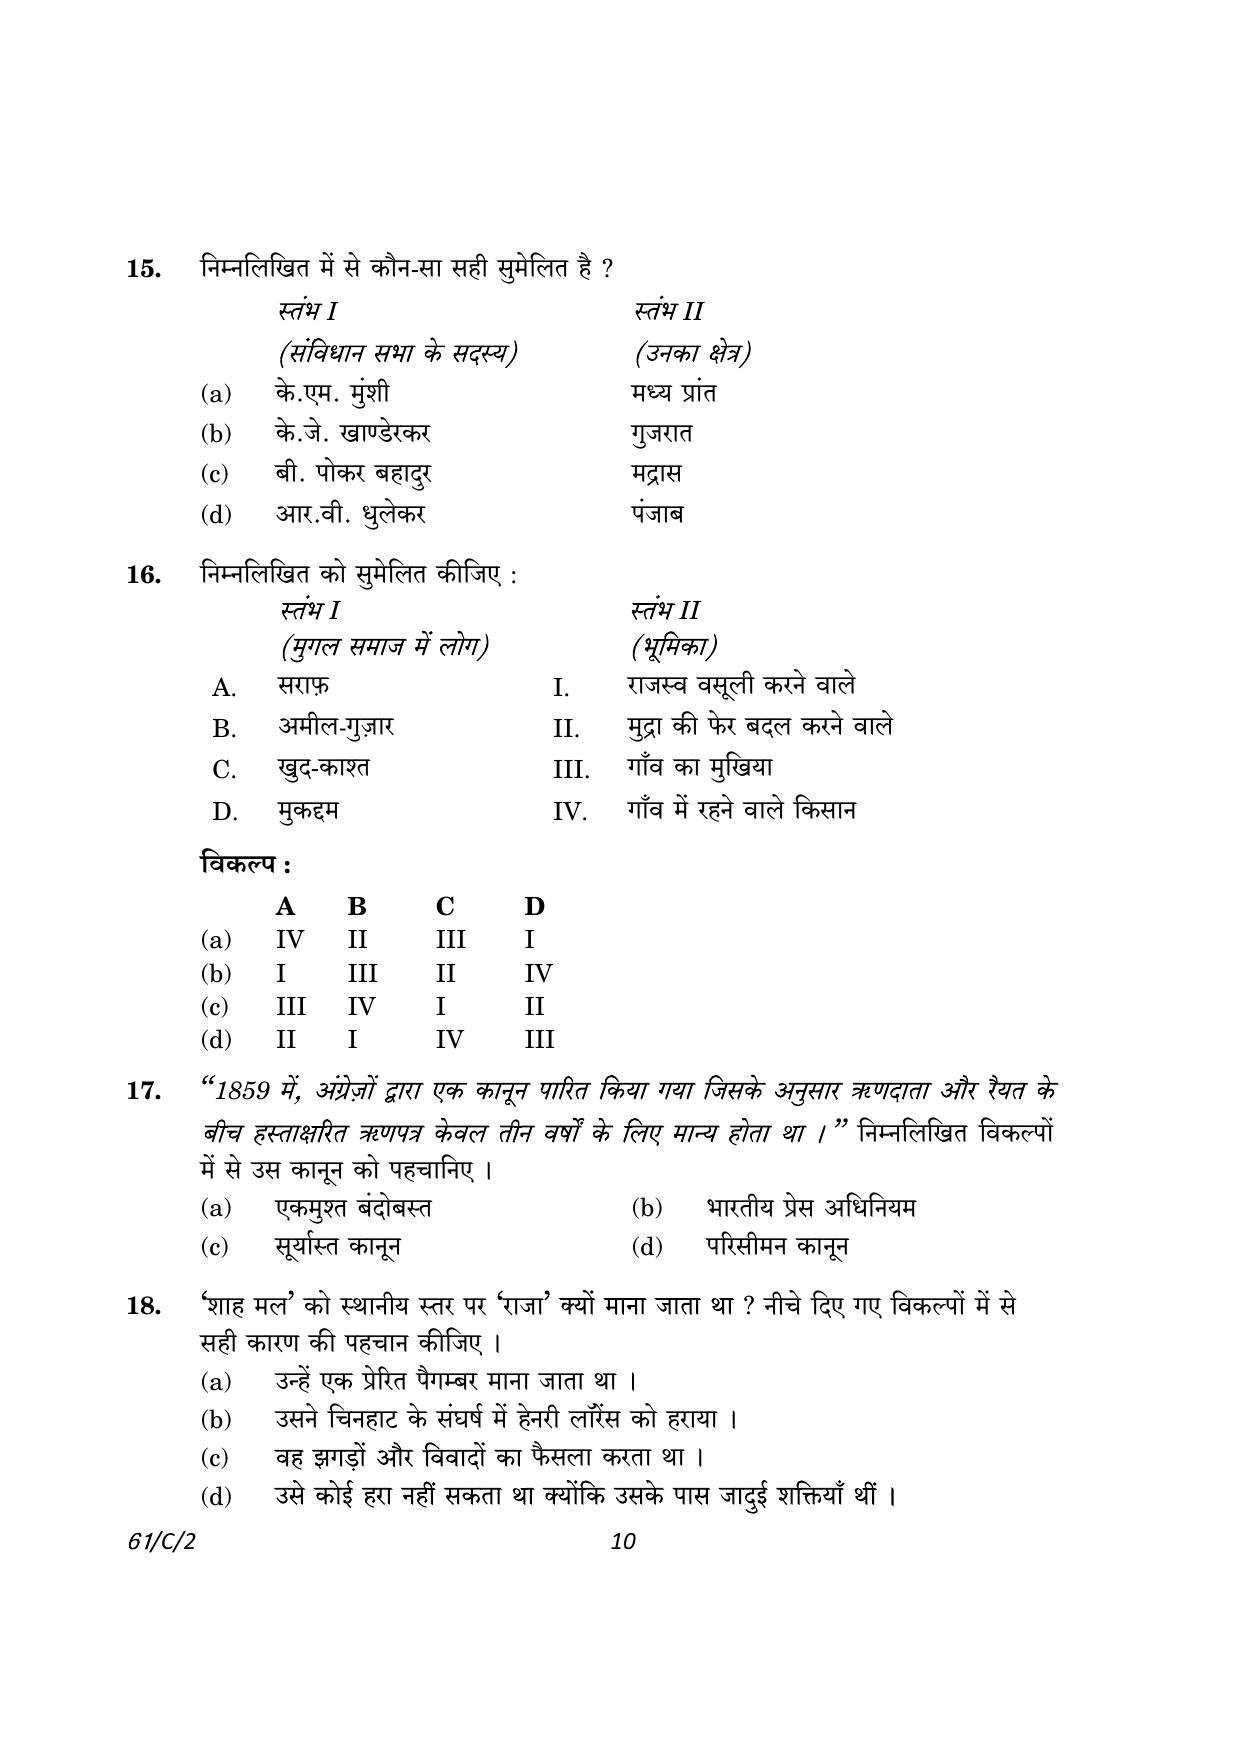 CBSE Class 12 61-2 History 2023 (Compartment) Question Paper - Page 10